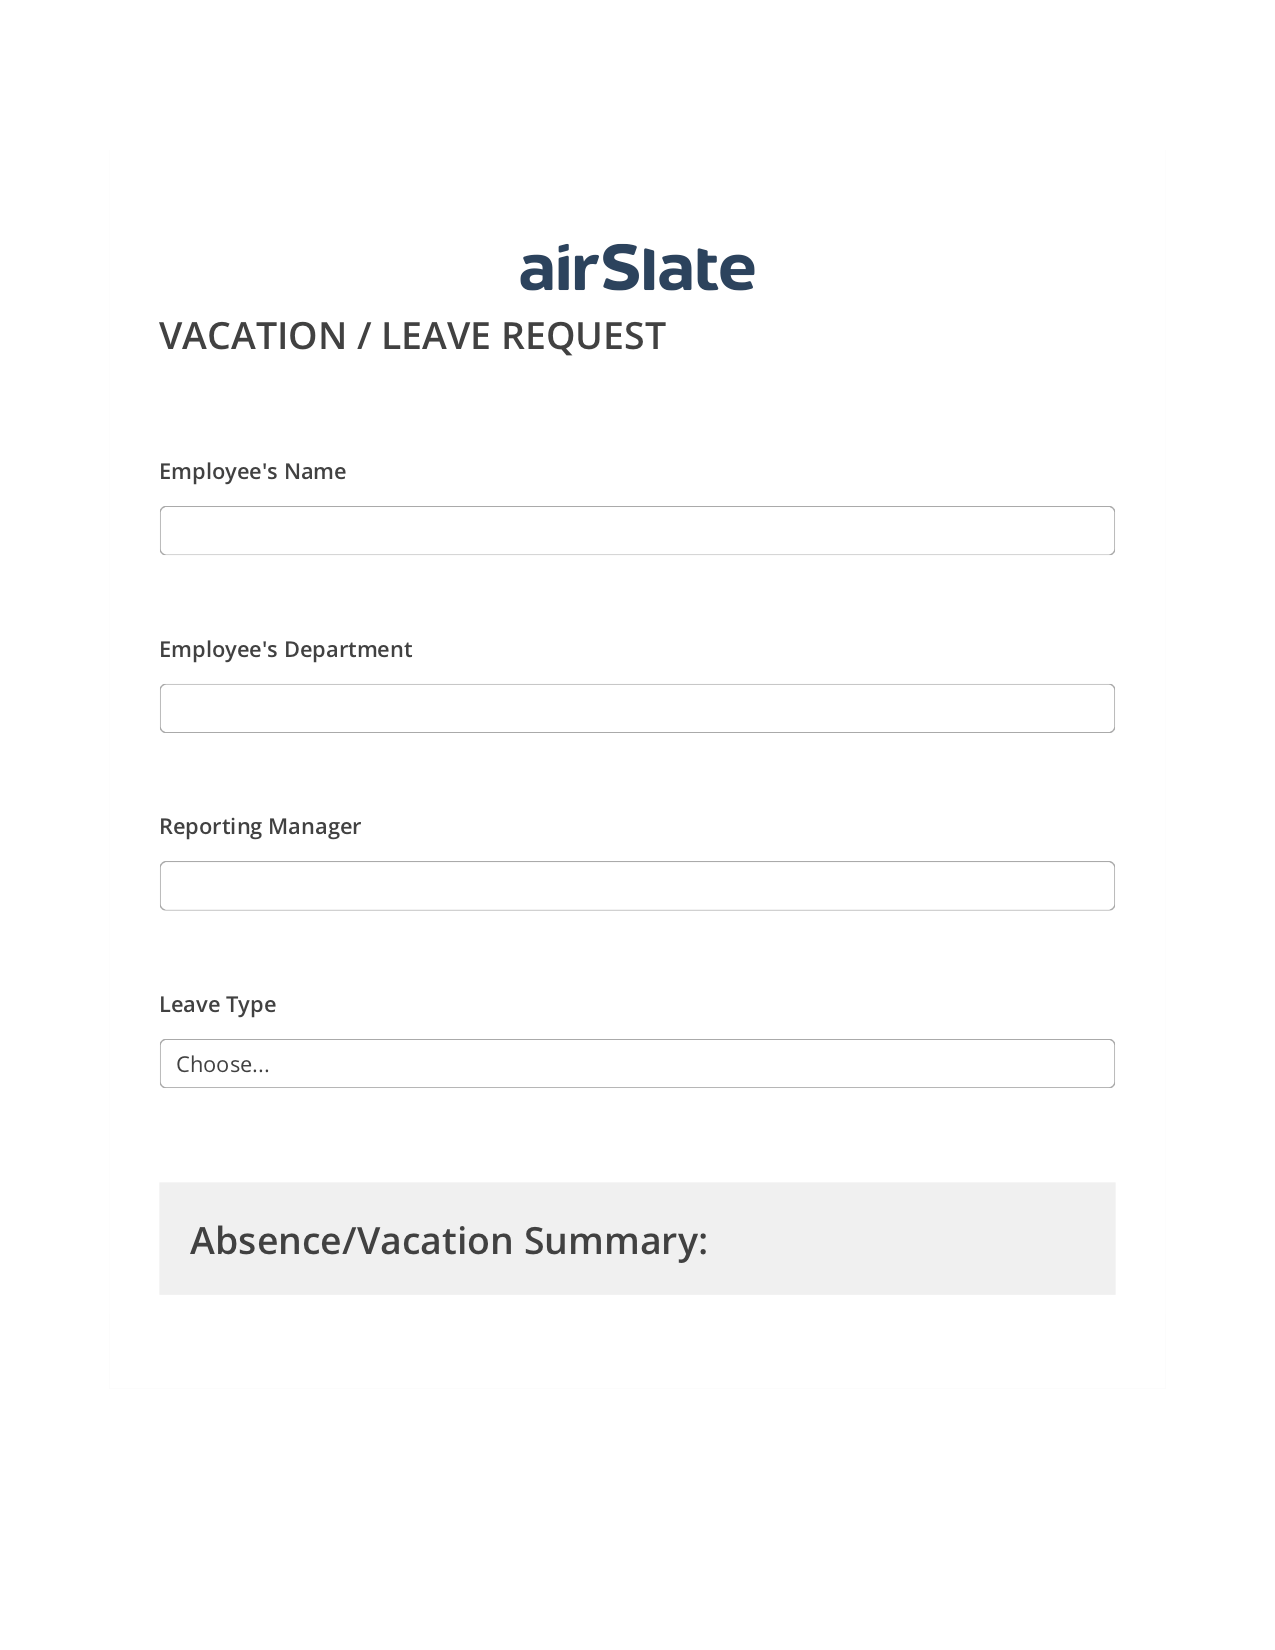 Vacation/Leave Request Workflow Pre-fill from MS Dynamics 365 Records, SendGrid send Campaign bot, Export to Salesforce Record Bot